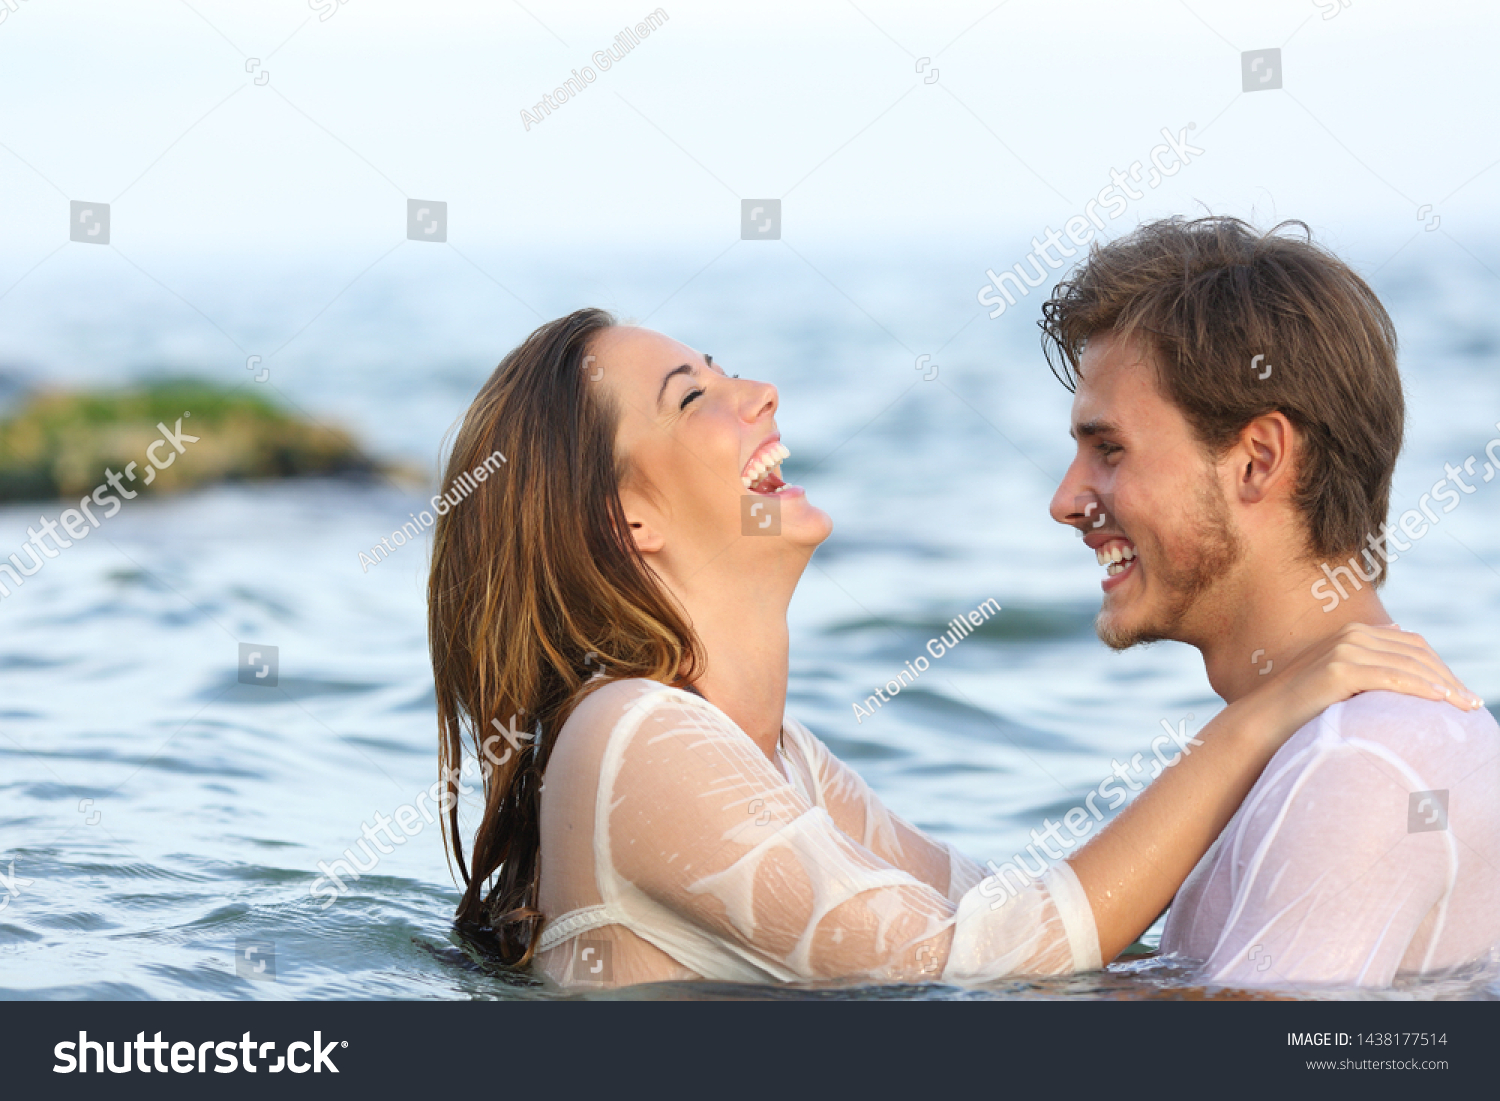 Side view portrait of a happy spontaneous couple joking in the water on the beach #1438177514